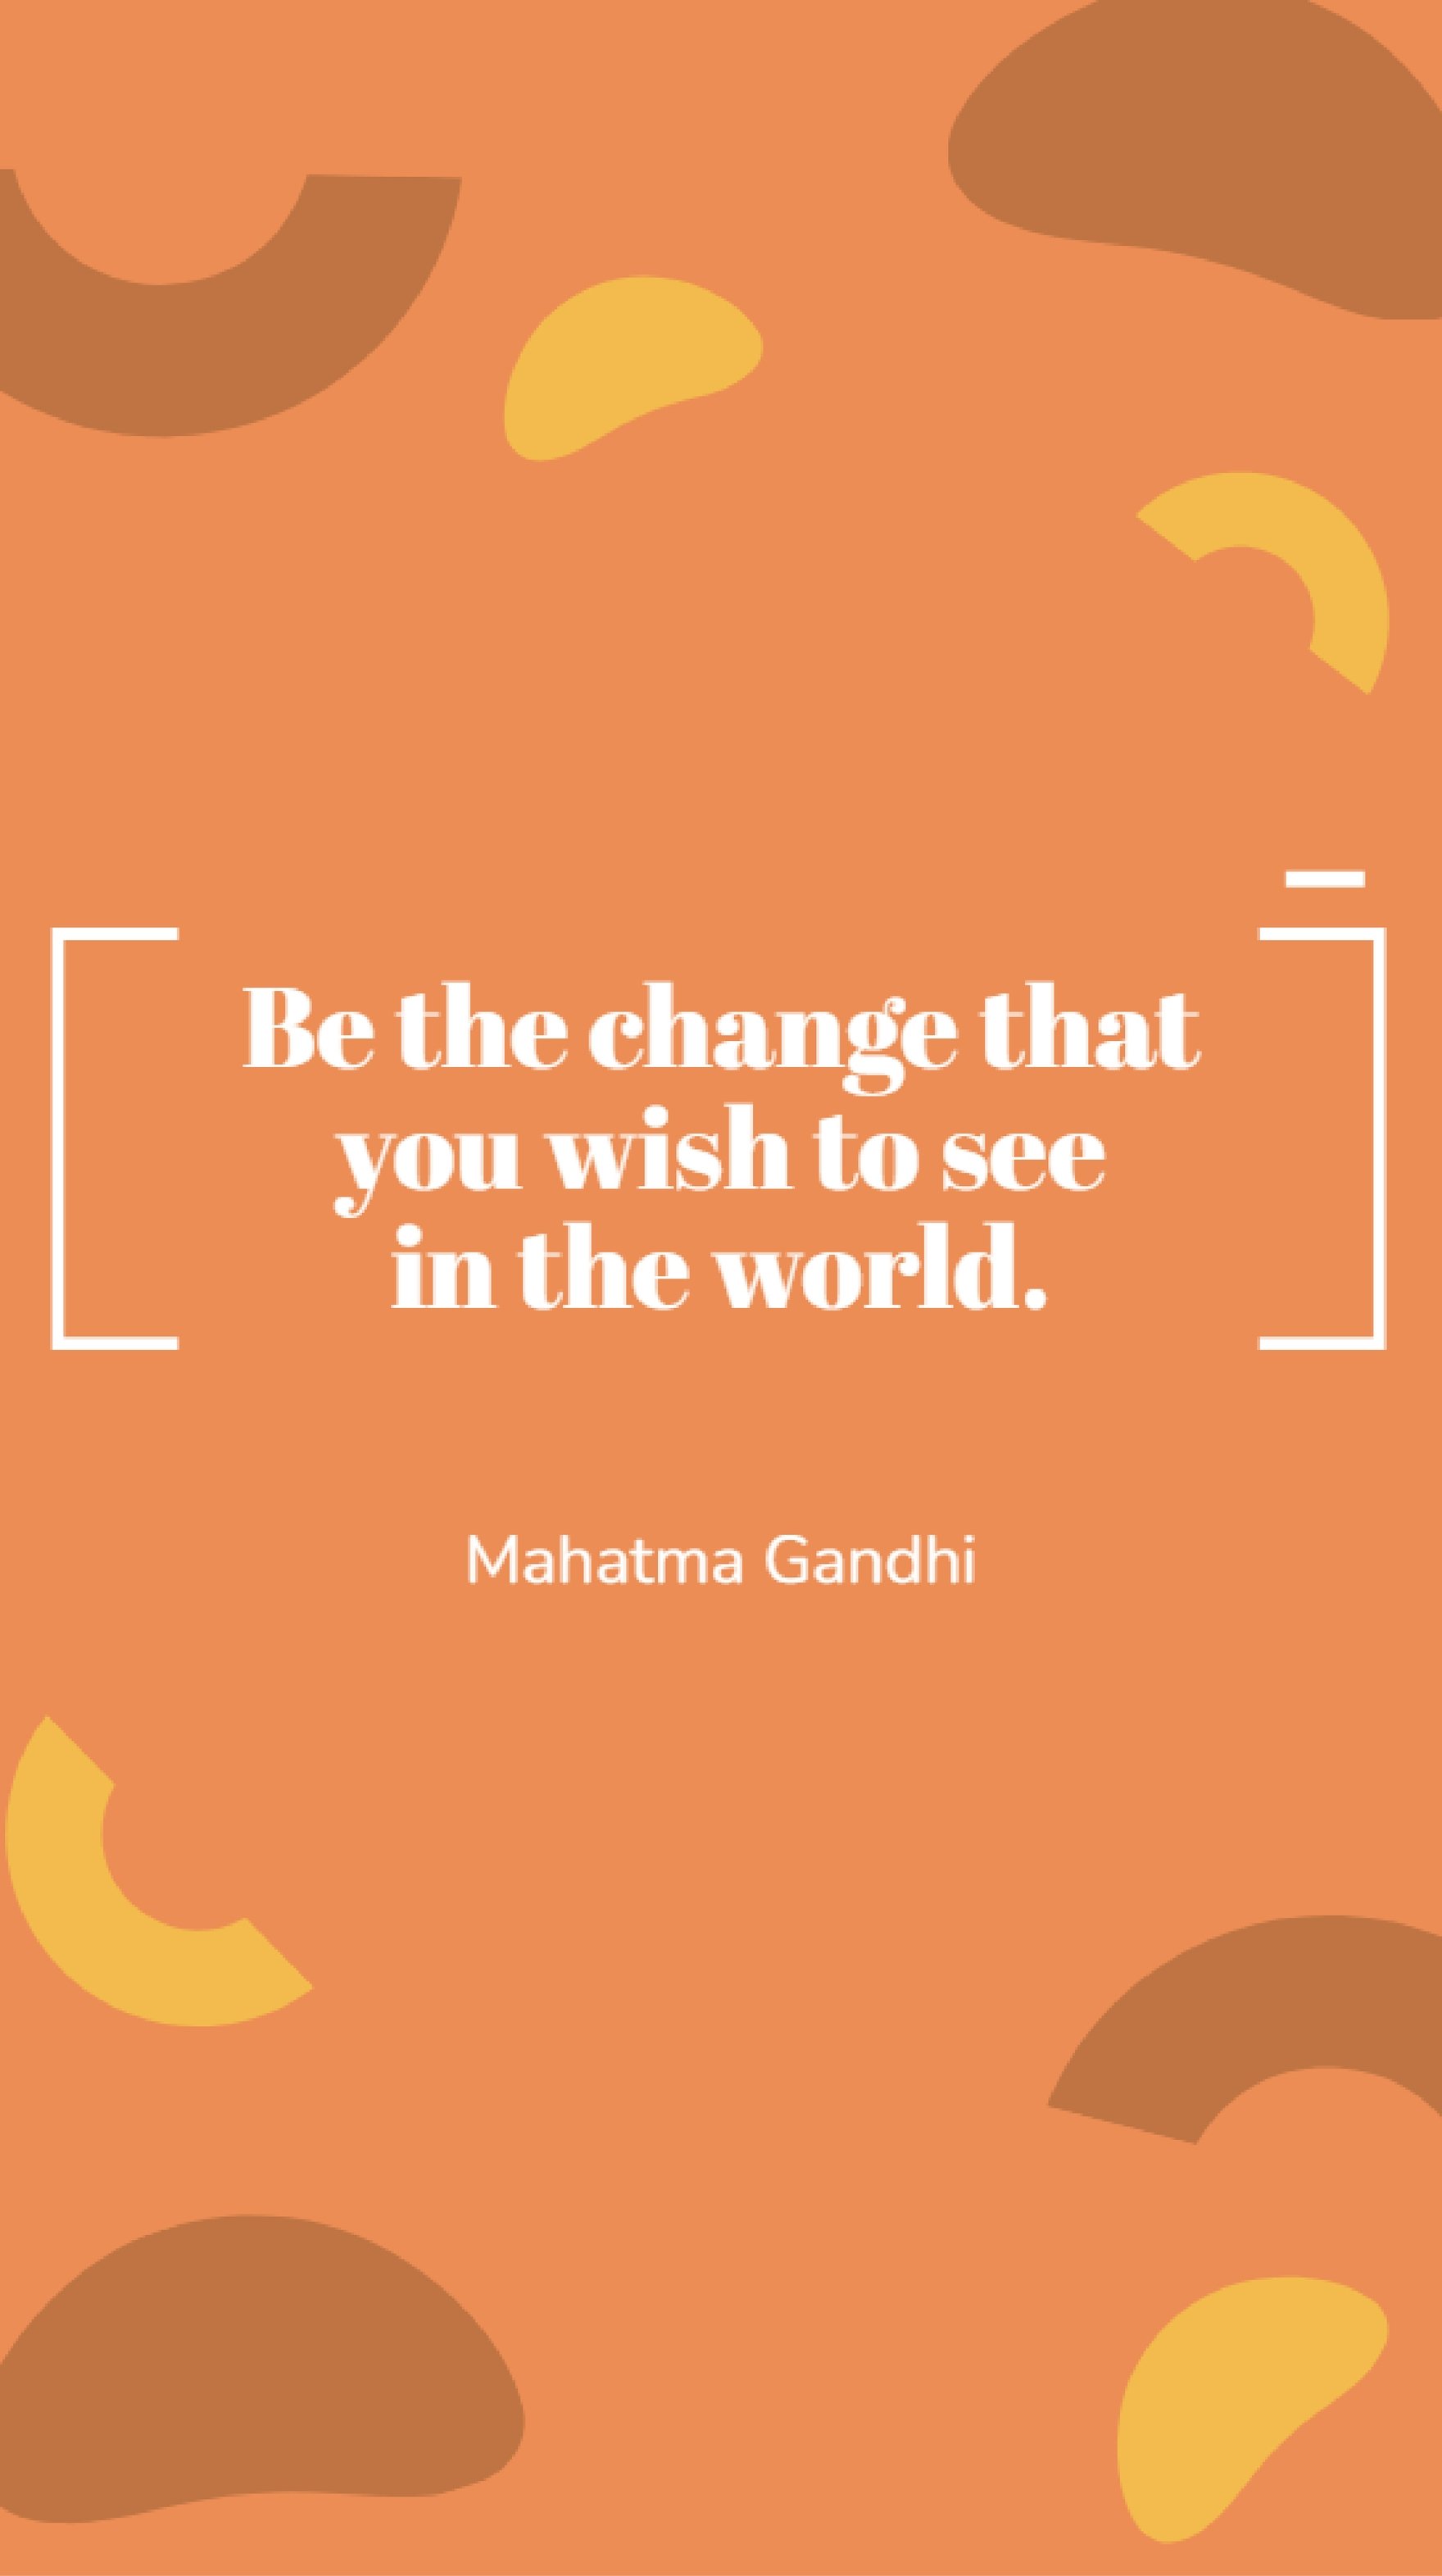 Mahatma Gandhi - “Be the change that you wish to see in the world.”